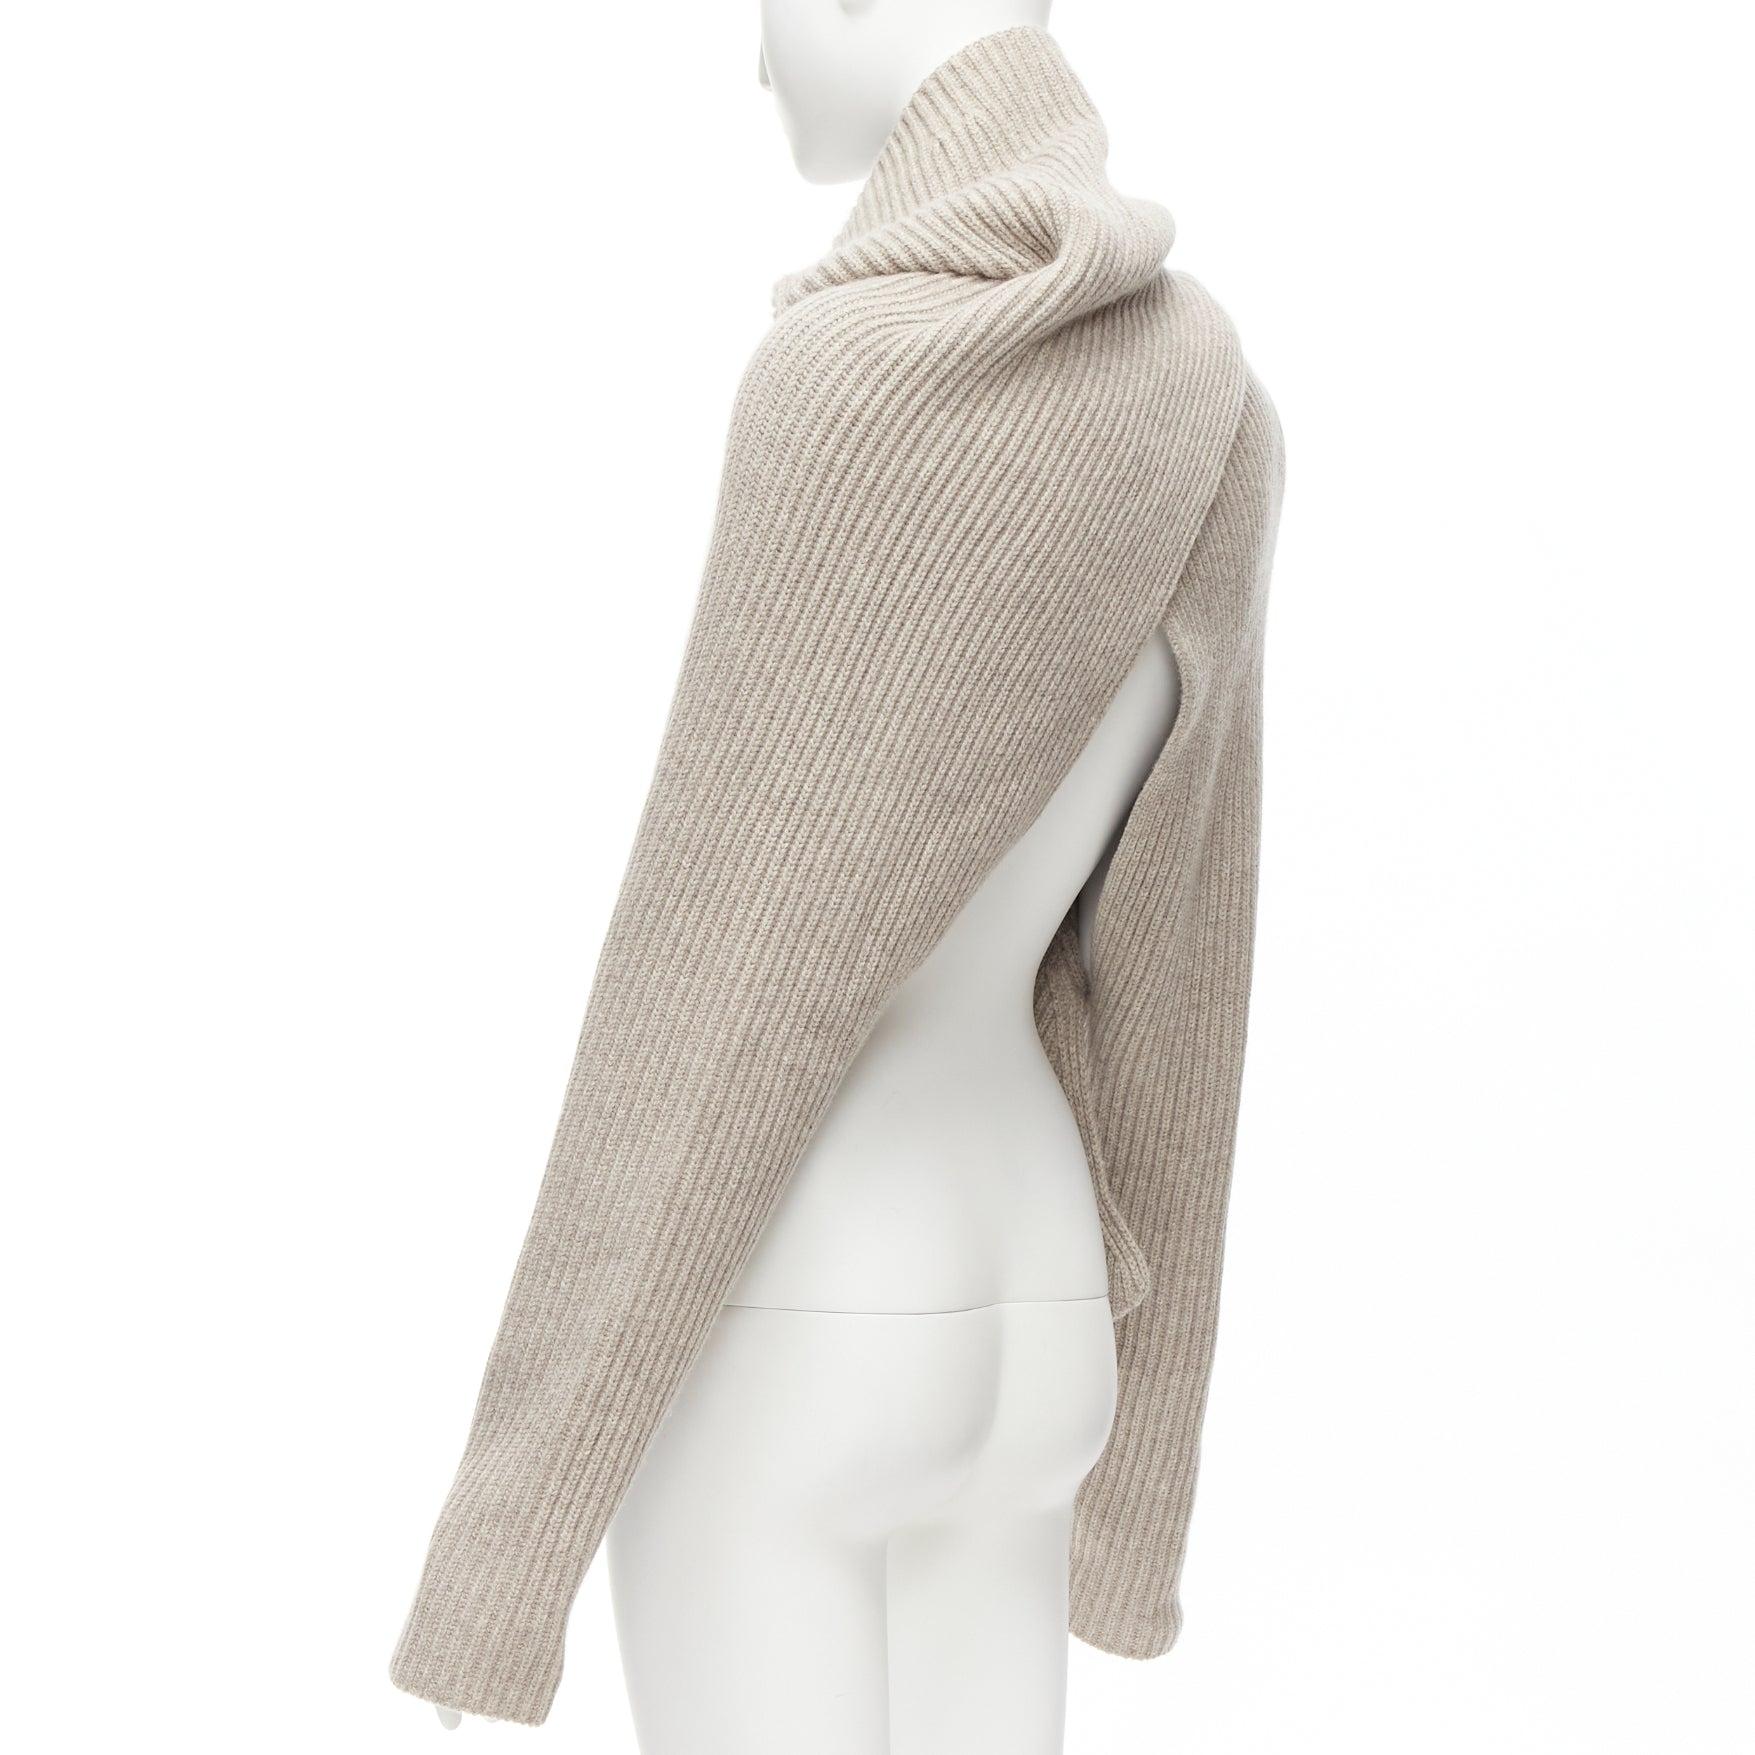 OLD CELINE Phoebe Philo stone wool cashmere draped neck open back sweater XS
Reference: TGAS/D01070
Brand: Celine
Designer: Phoebe Philo
Material: Wool, Cashmere
Color: Beige
Pattern: Solid
Closure: Slip On
Extra Details: Open back design.
Made in: